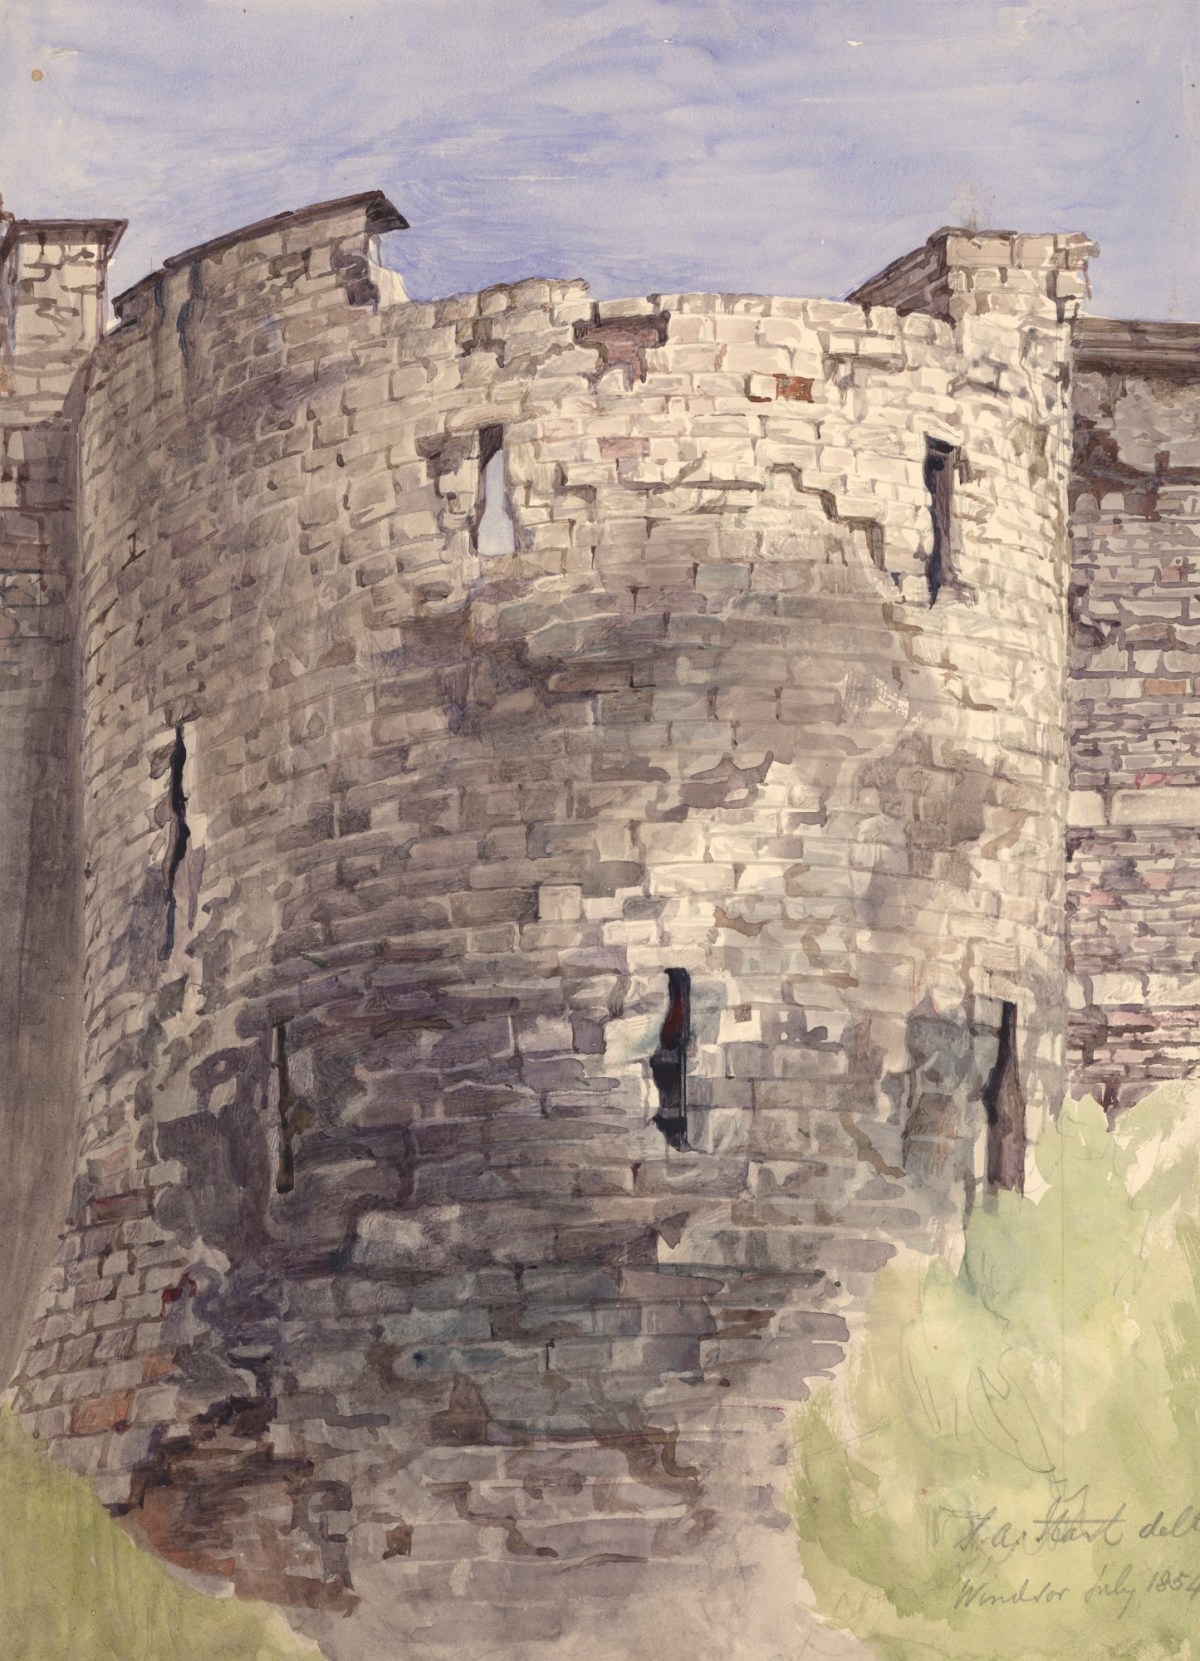 Section of the walls, Windsor Castle, Works of Art, RA Collection